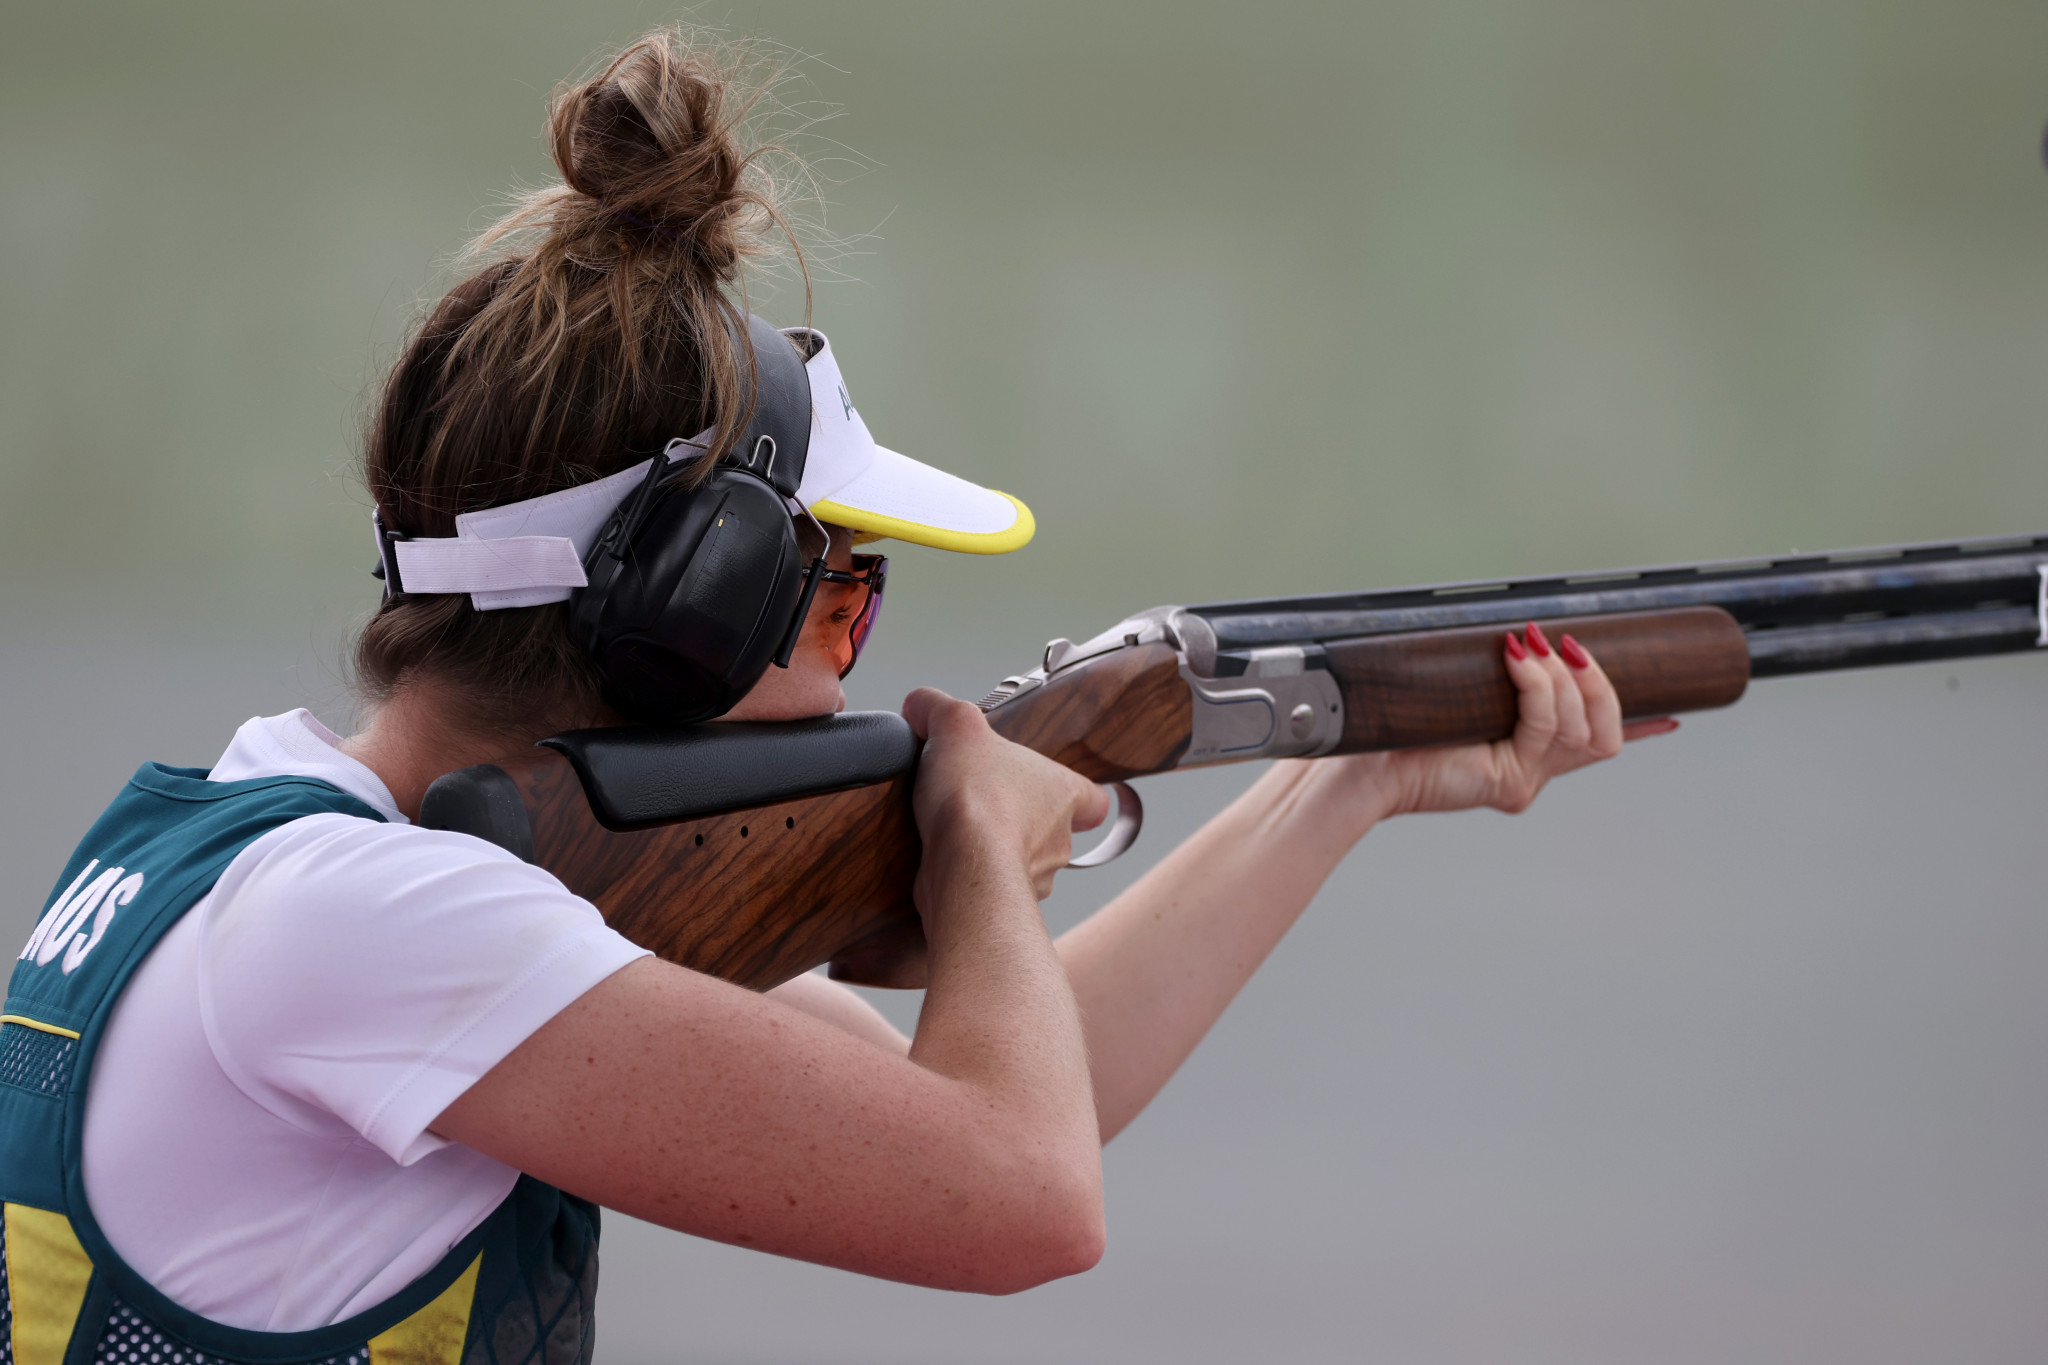 Australia and Croatia earn team trap titles at ISSF World Cup in Lonato